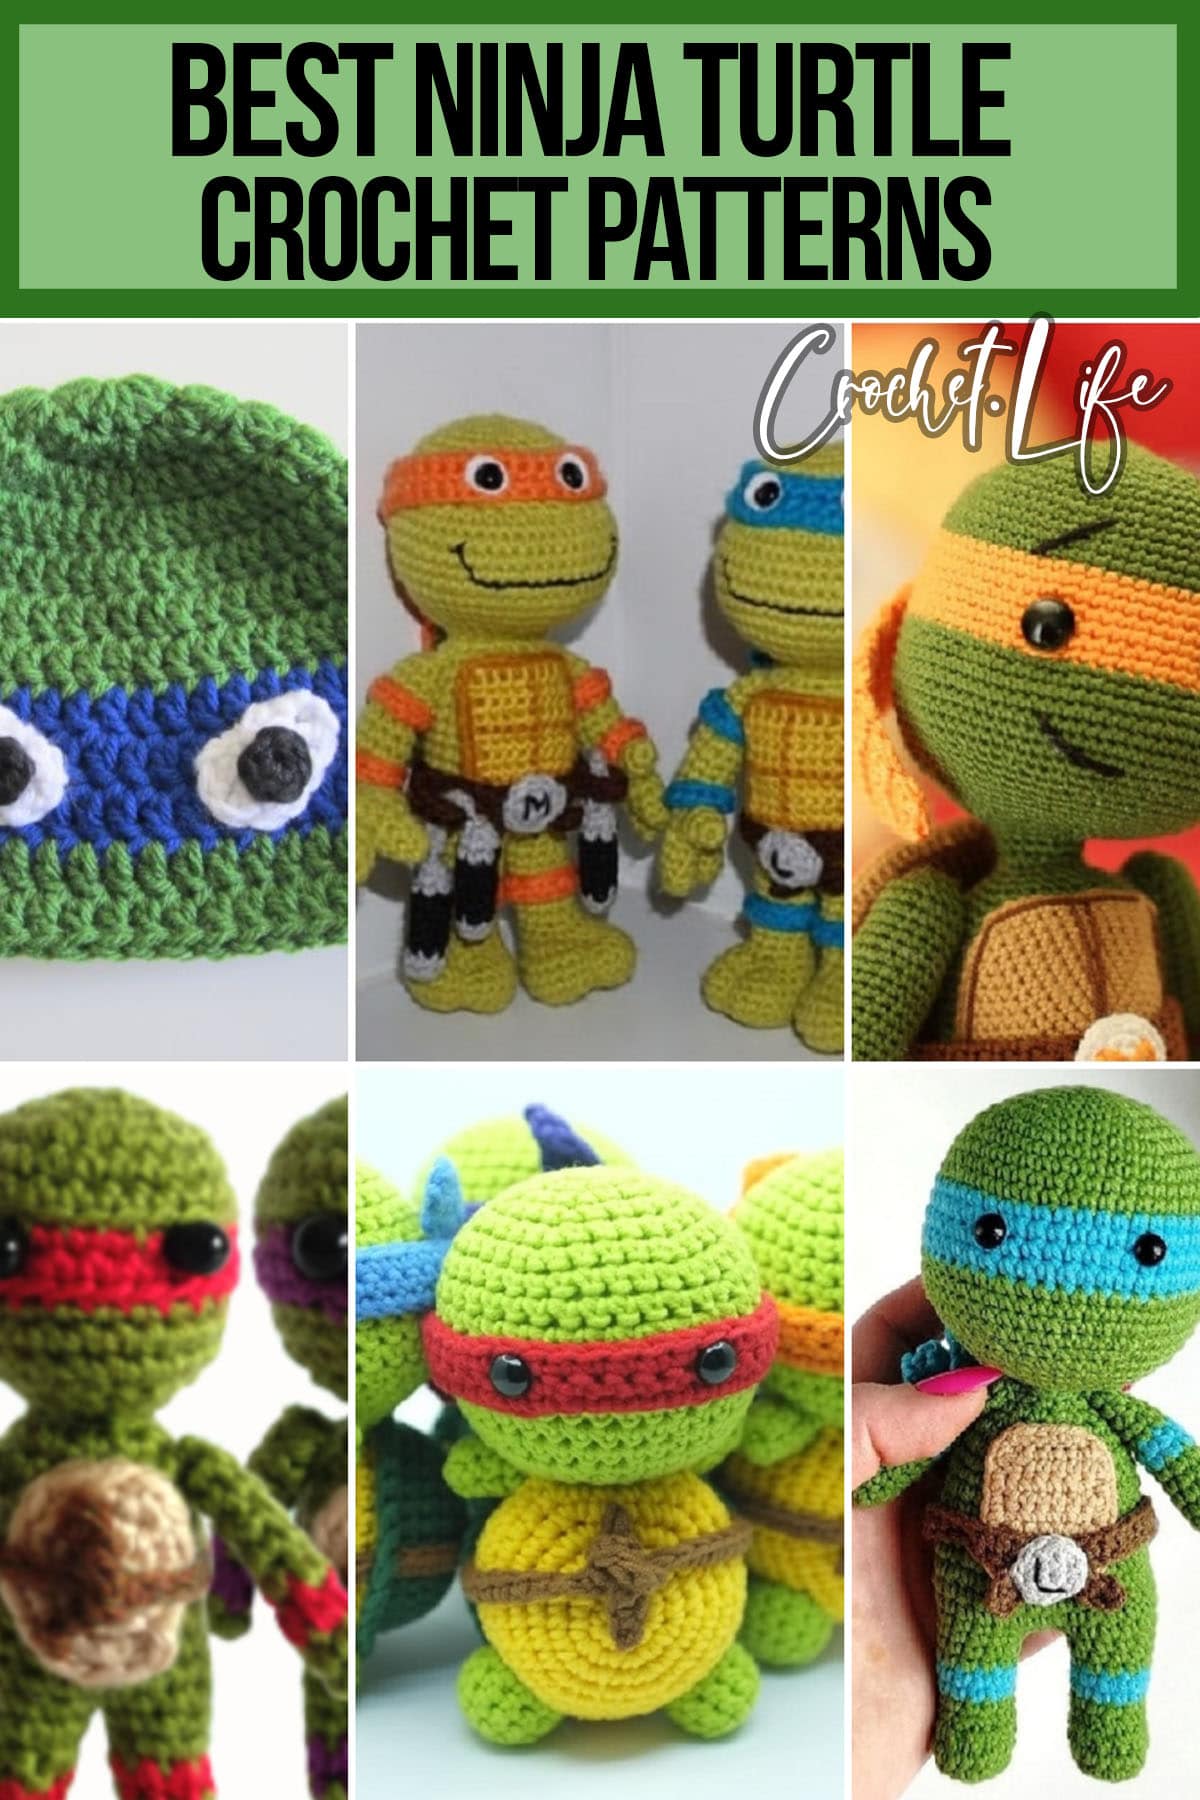 photo collage of crochet patterns for ninja turtles with text which reads best ninja turtle crochet patterns